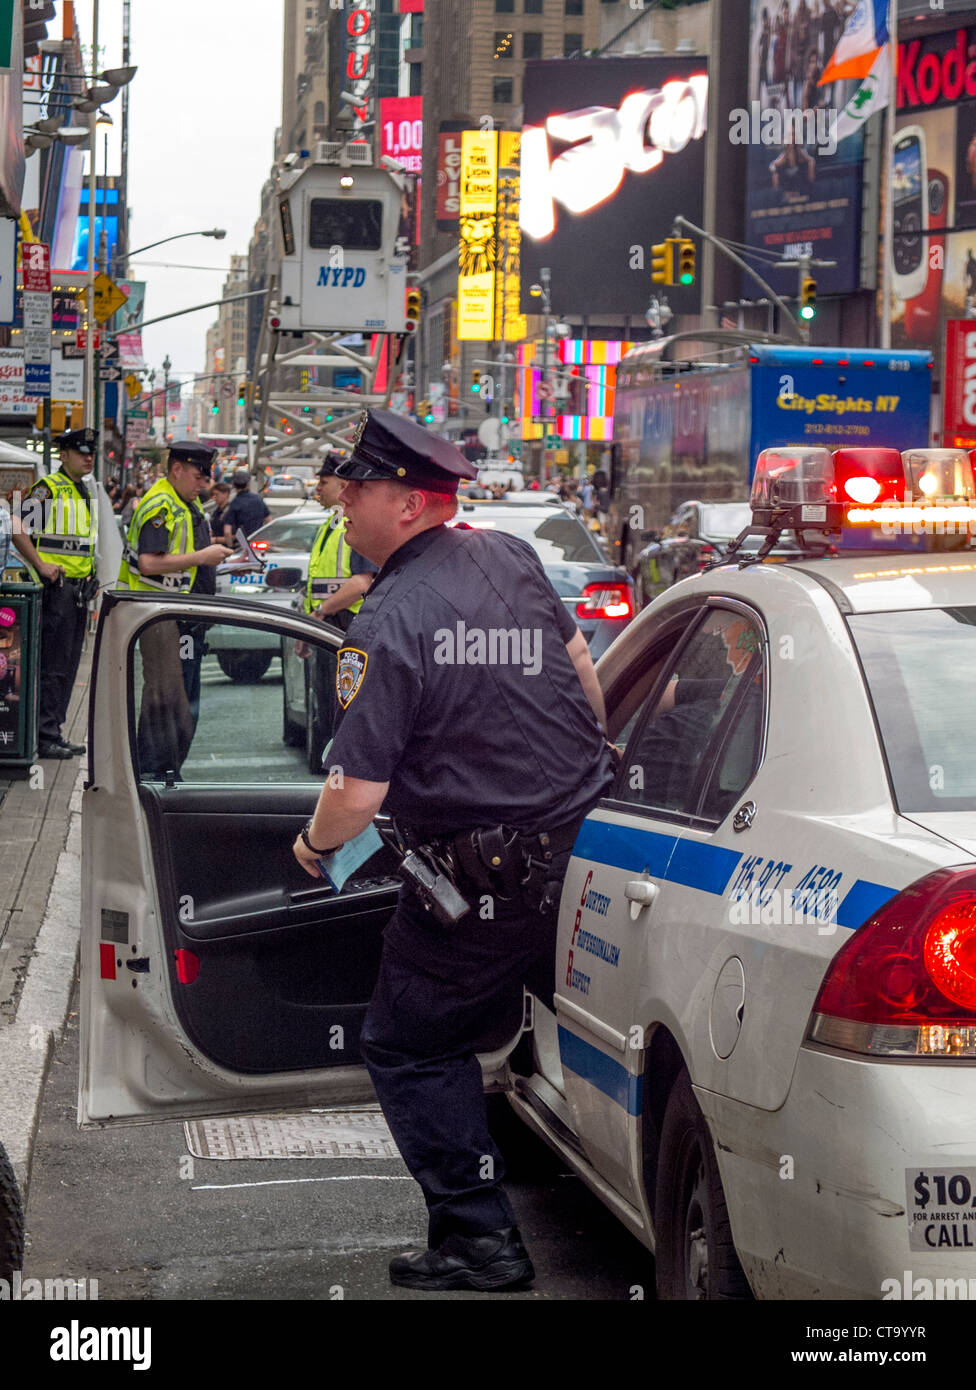 Answering a call, a policeman hurries from his squad car in Times Square, New York City. Note police mobile guard tower. Stock Photo